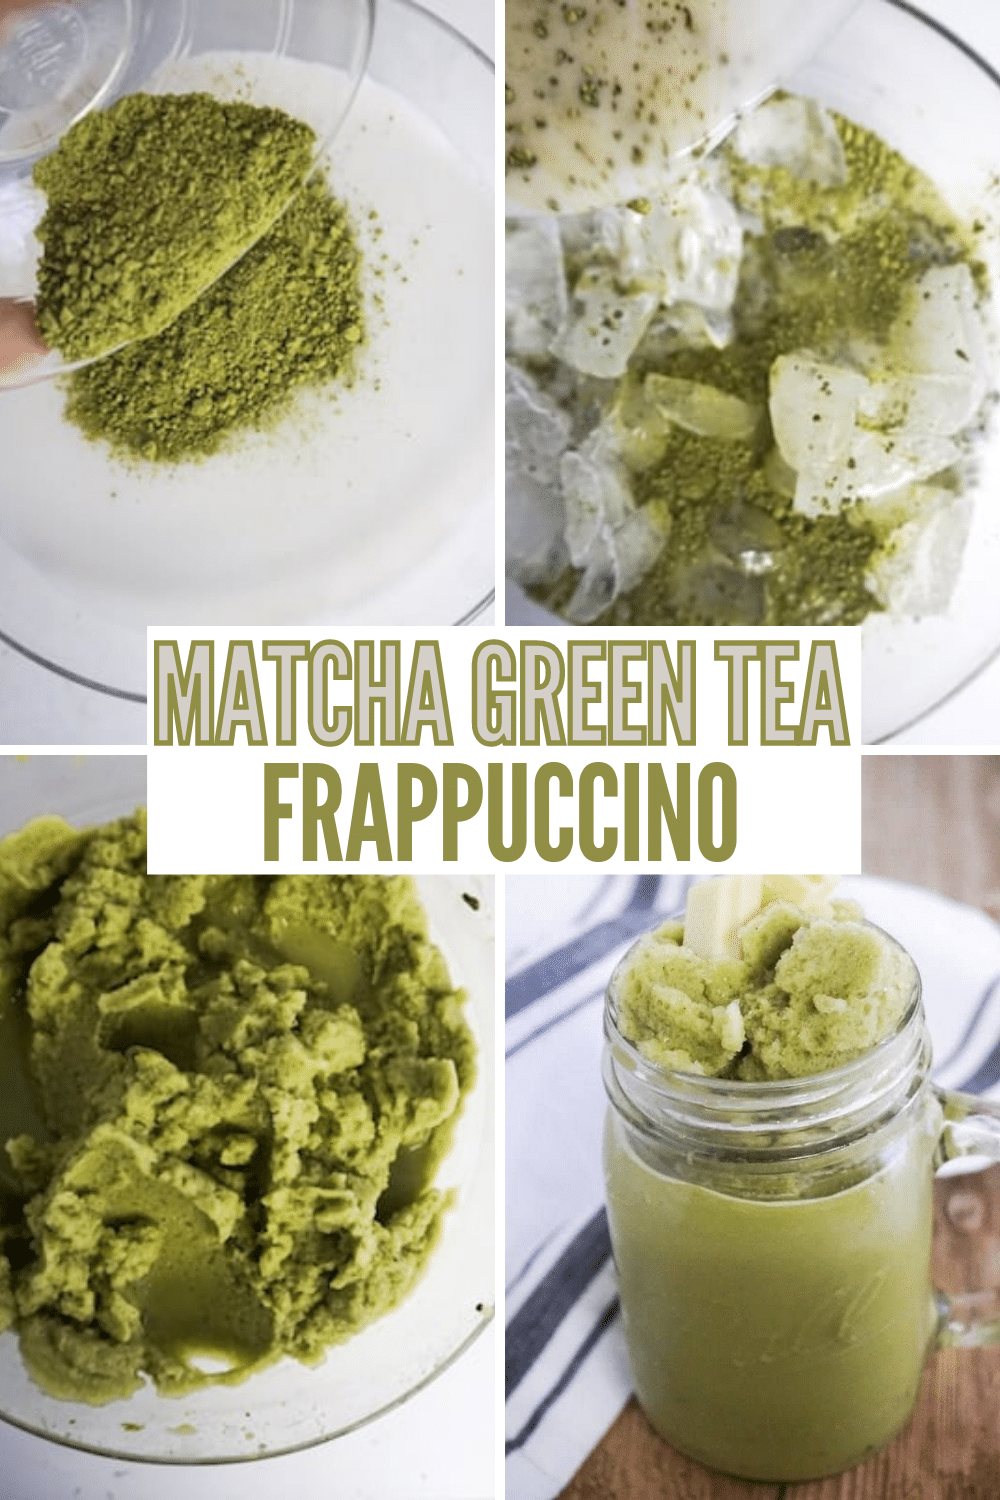 If you're a green tea lover, you should try this fool-proof classic matcha green tea frappuccino recipe. You can make it in just 5 minutes! #matchagreentea #frappuccino #recipe #greentea via @wondermomwannab